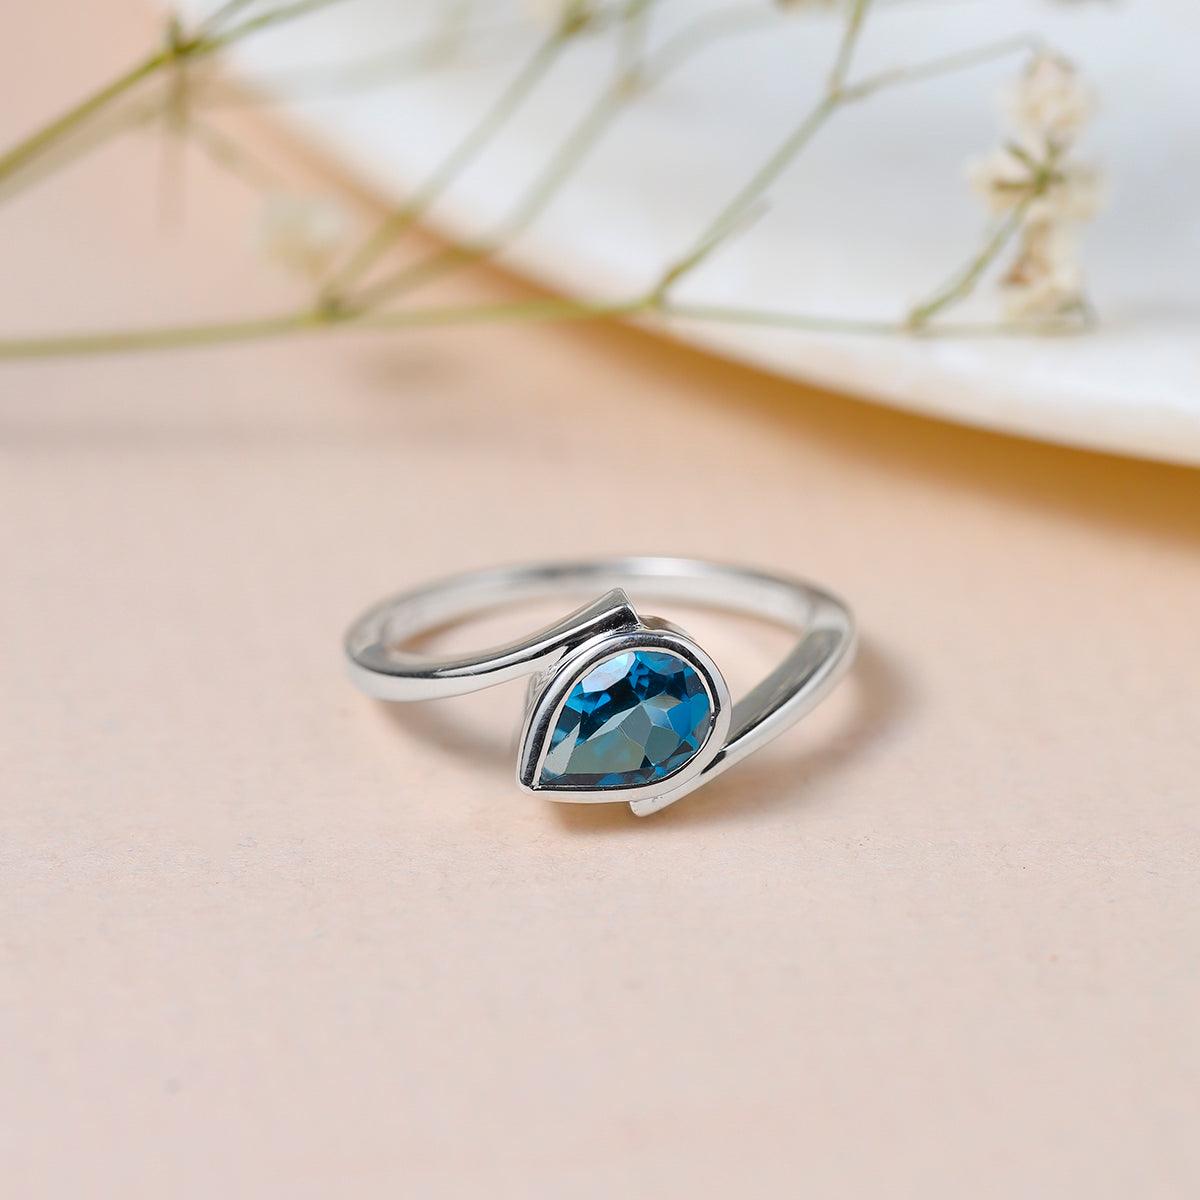 London Blue Topaz Solitaire Ring in Solid 925 Sterling Silver Jewelry - YoTreasure